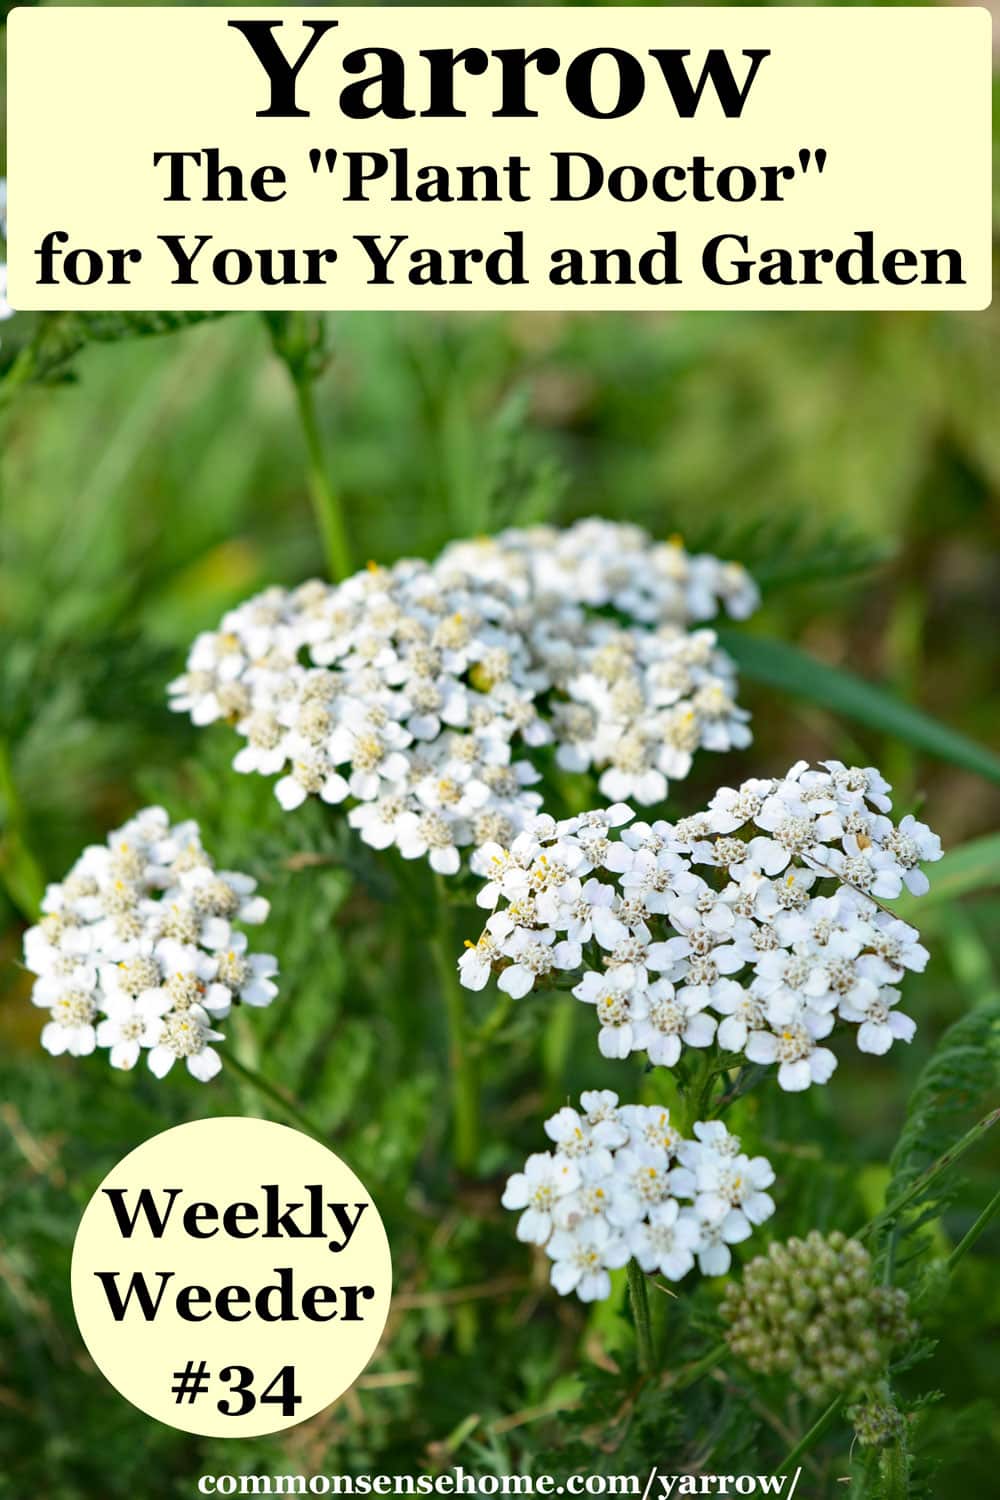 Yarrow plants with white flowers